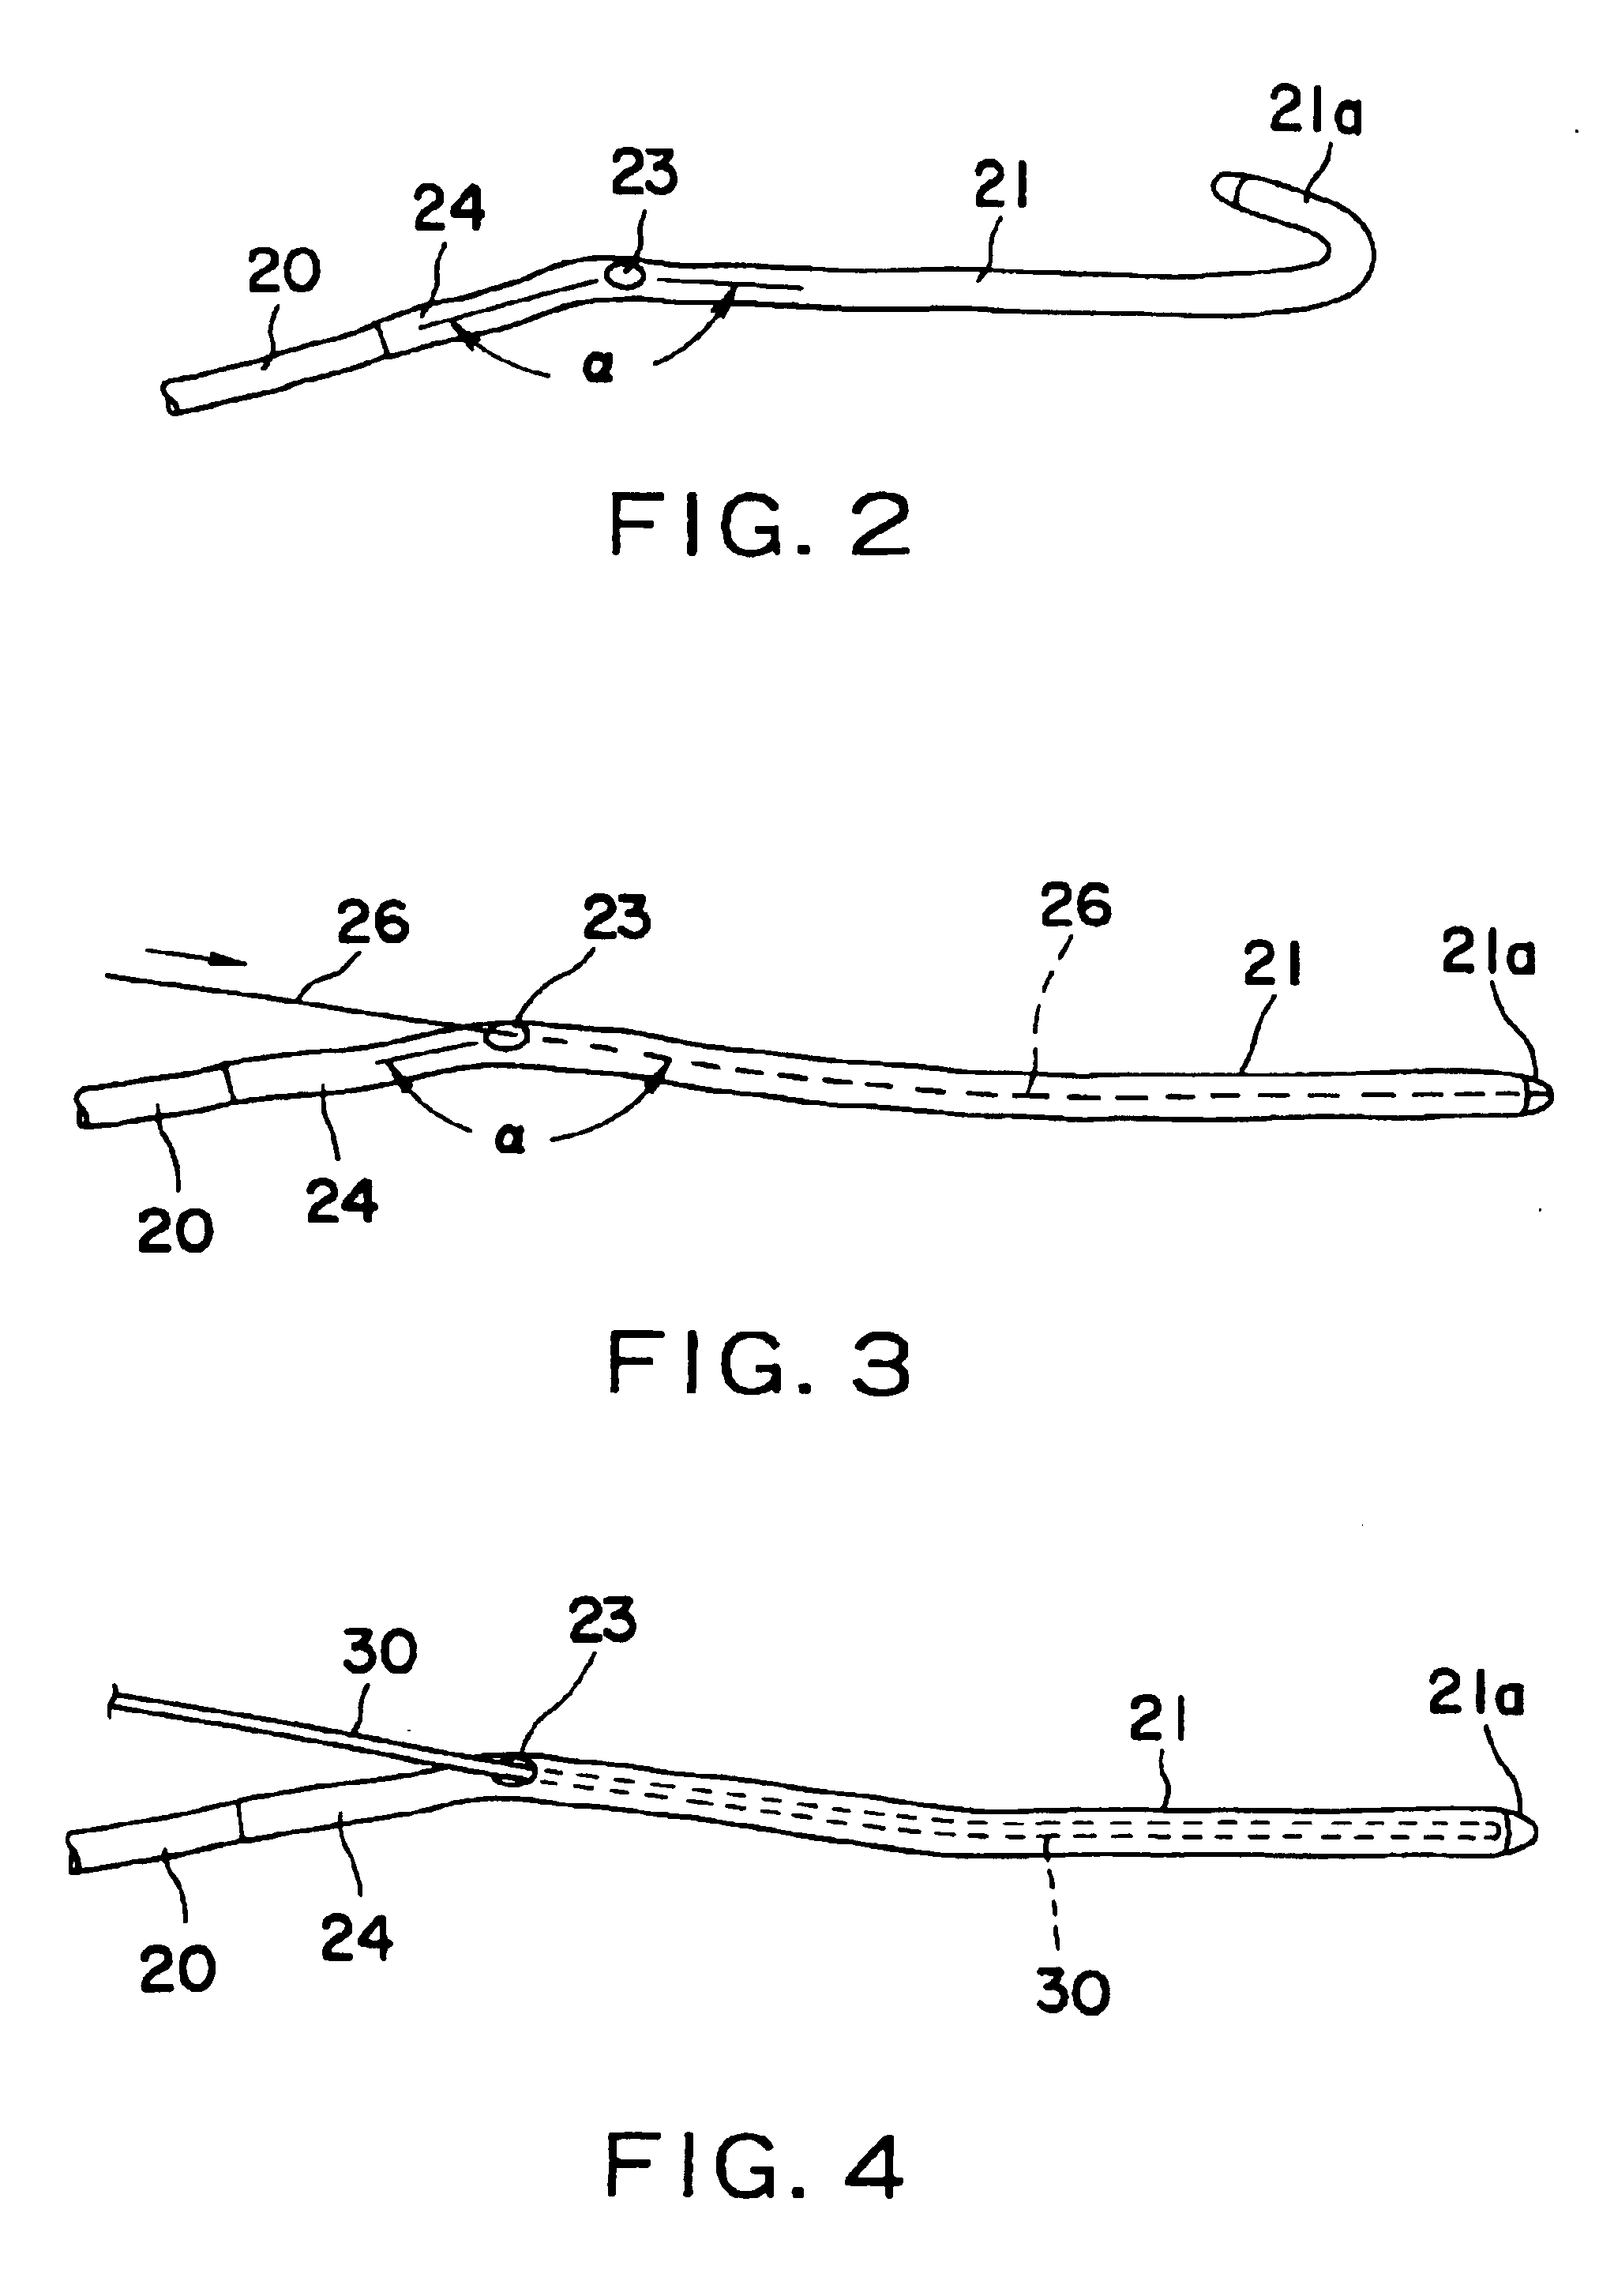 Nasolacrimal duct tube used for lacrimal duct reformation operation, and nasolacrimal duct tube instrument